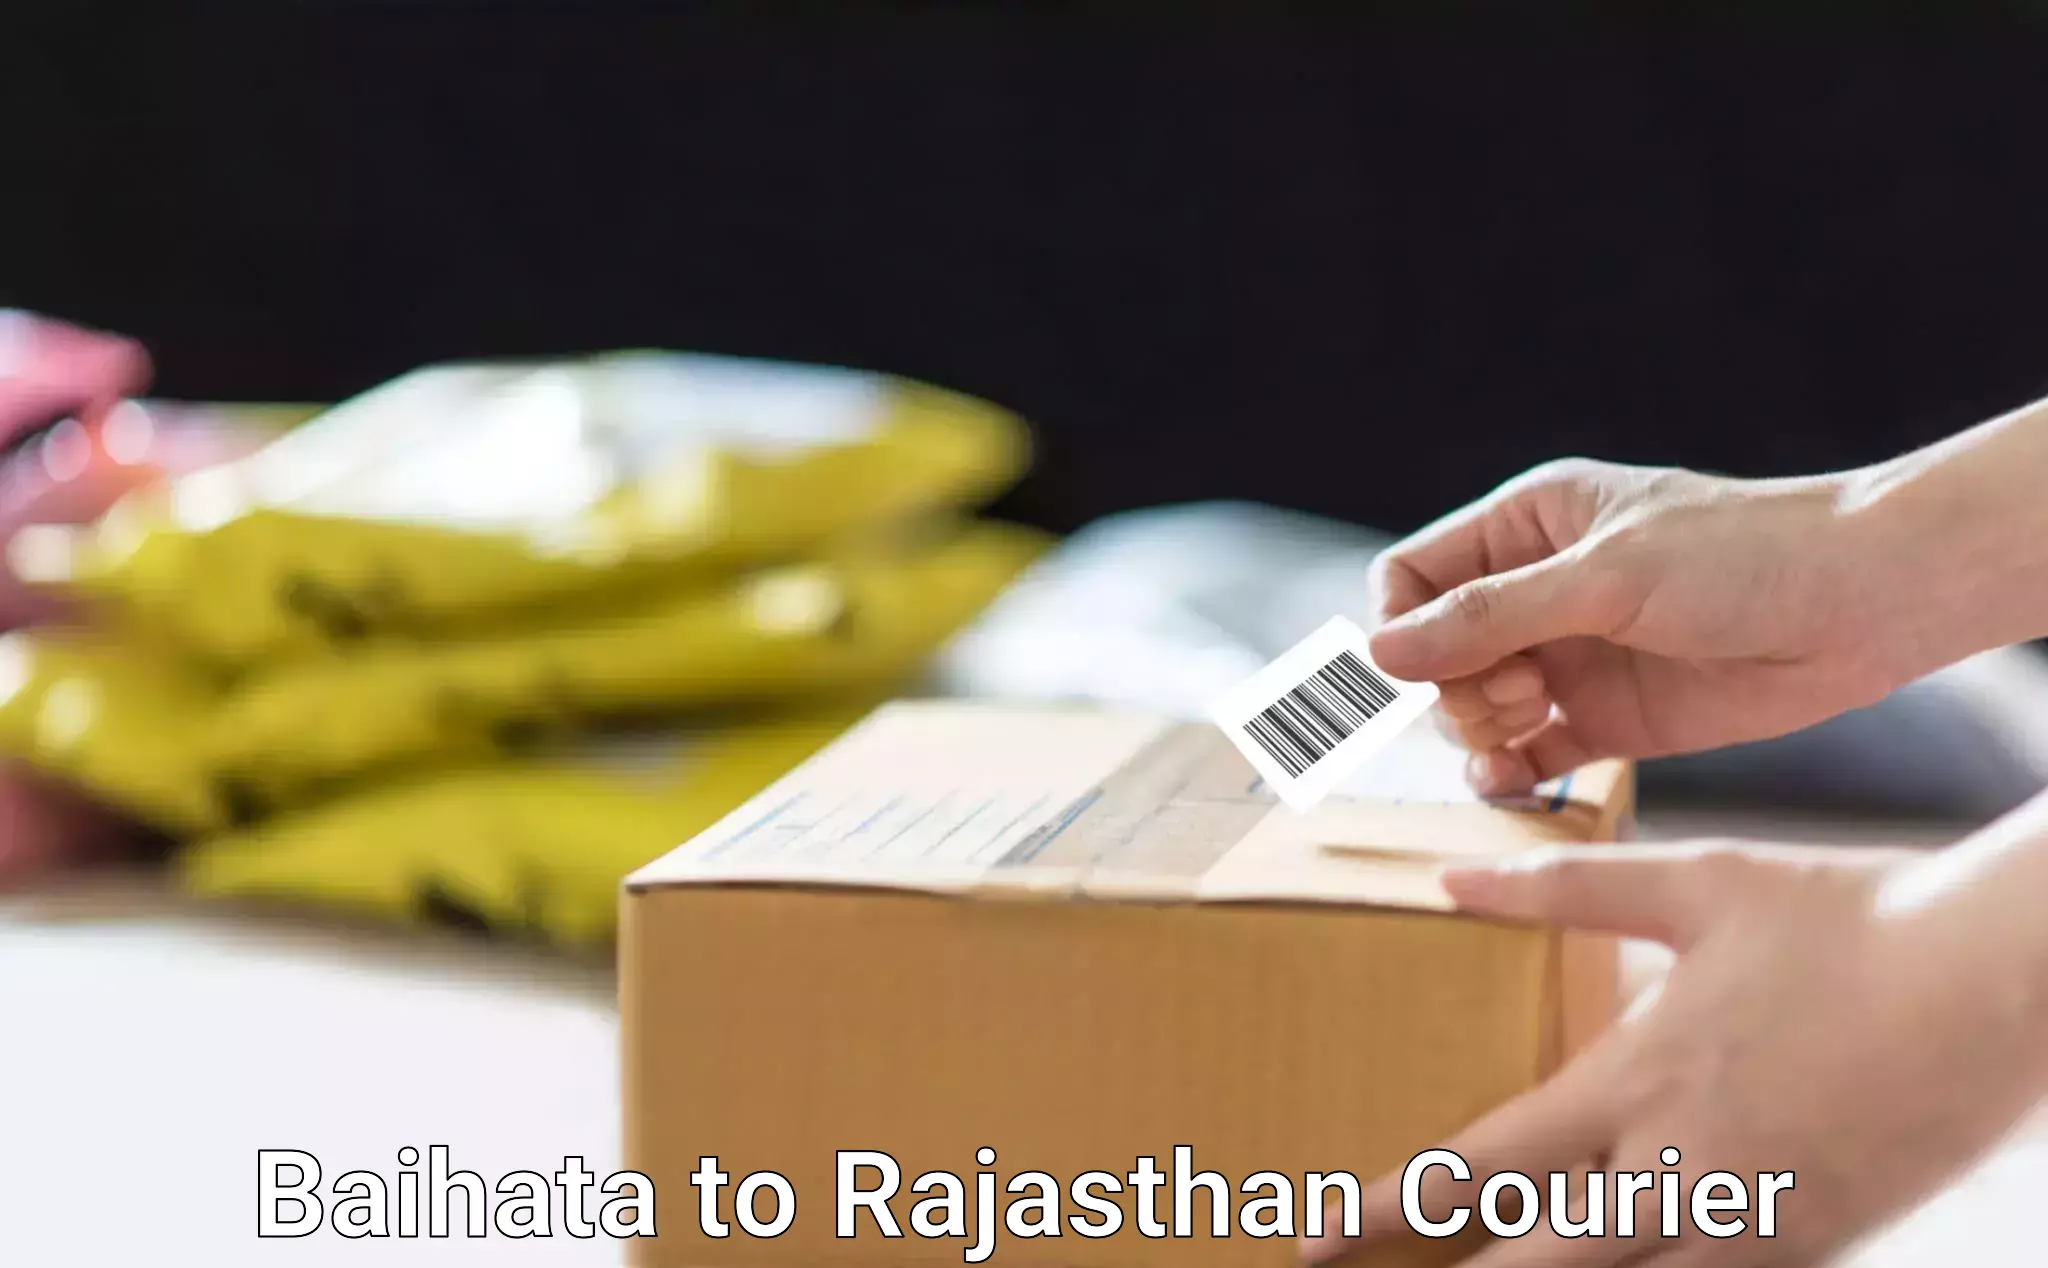 State-of-the-art courier technology Baihata to Jalore